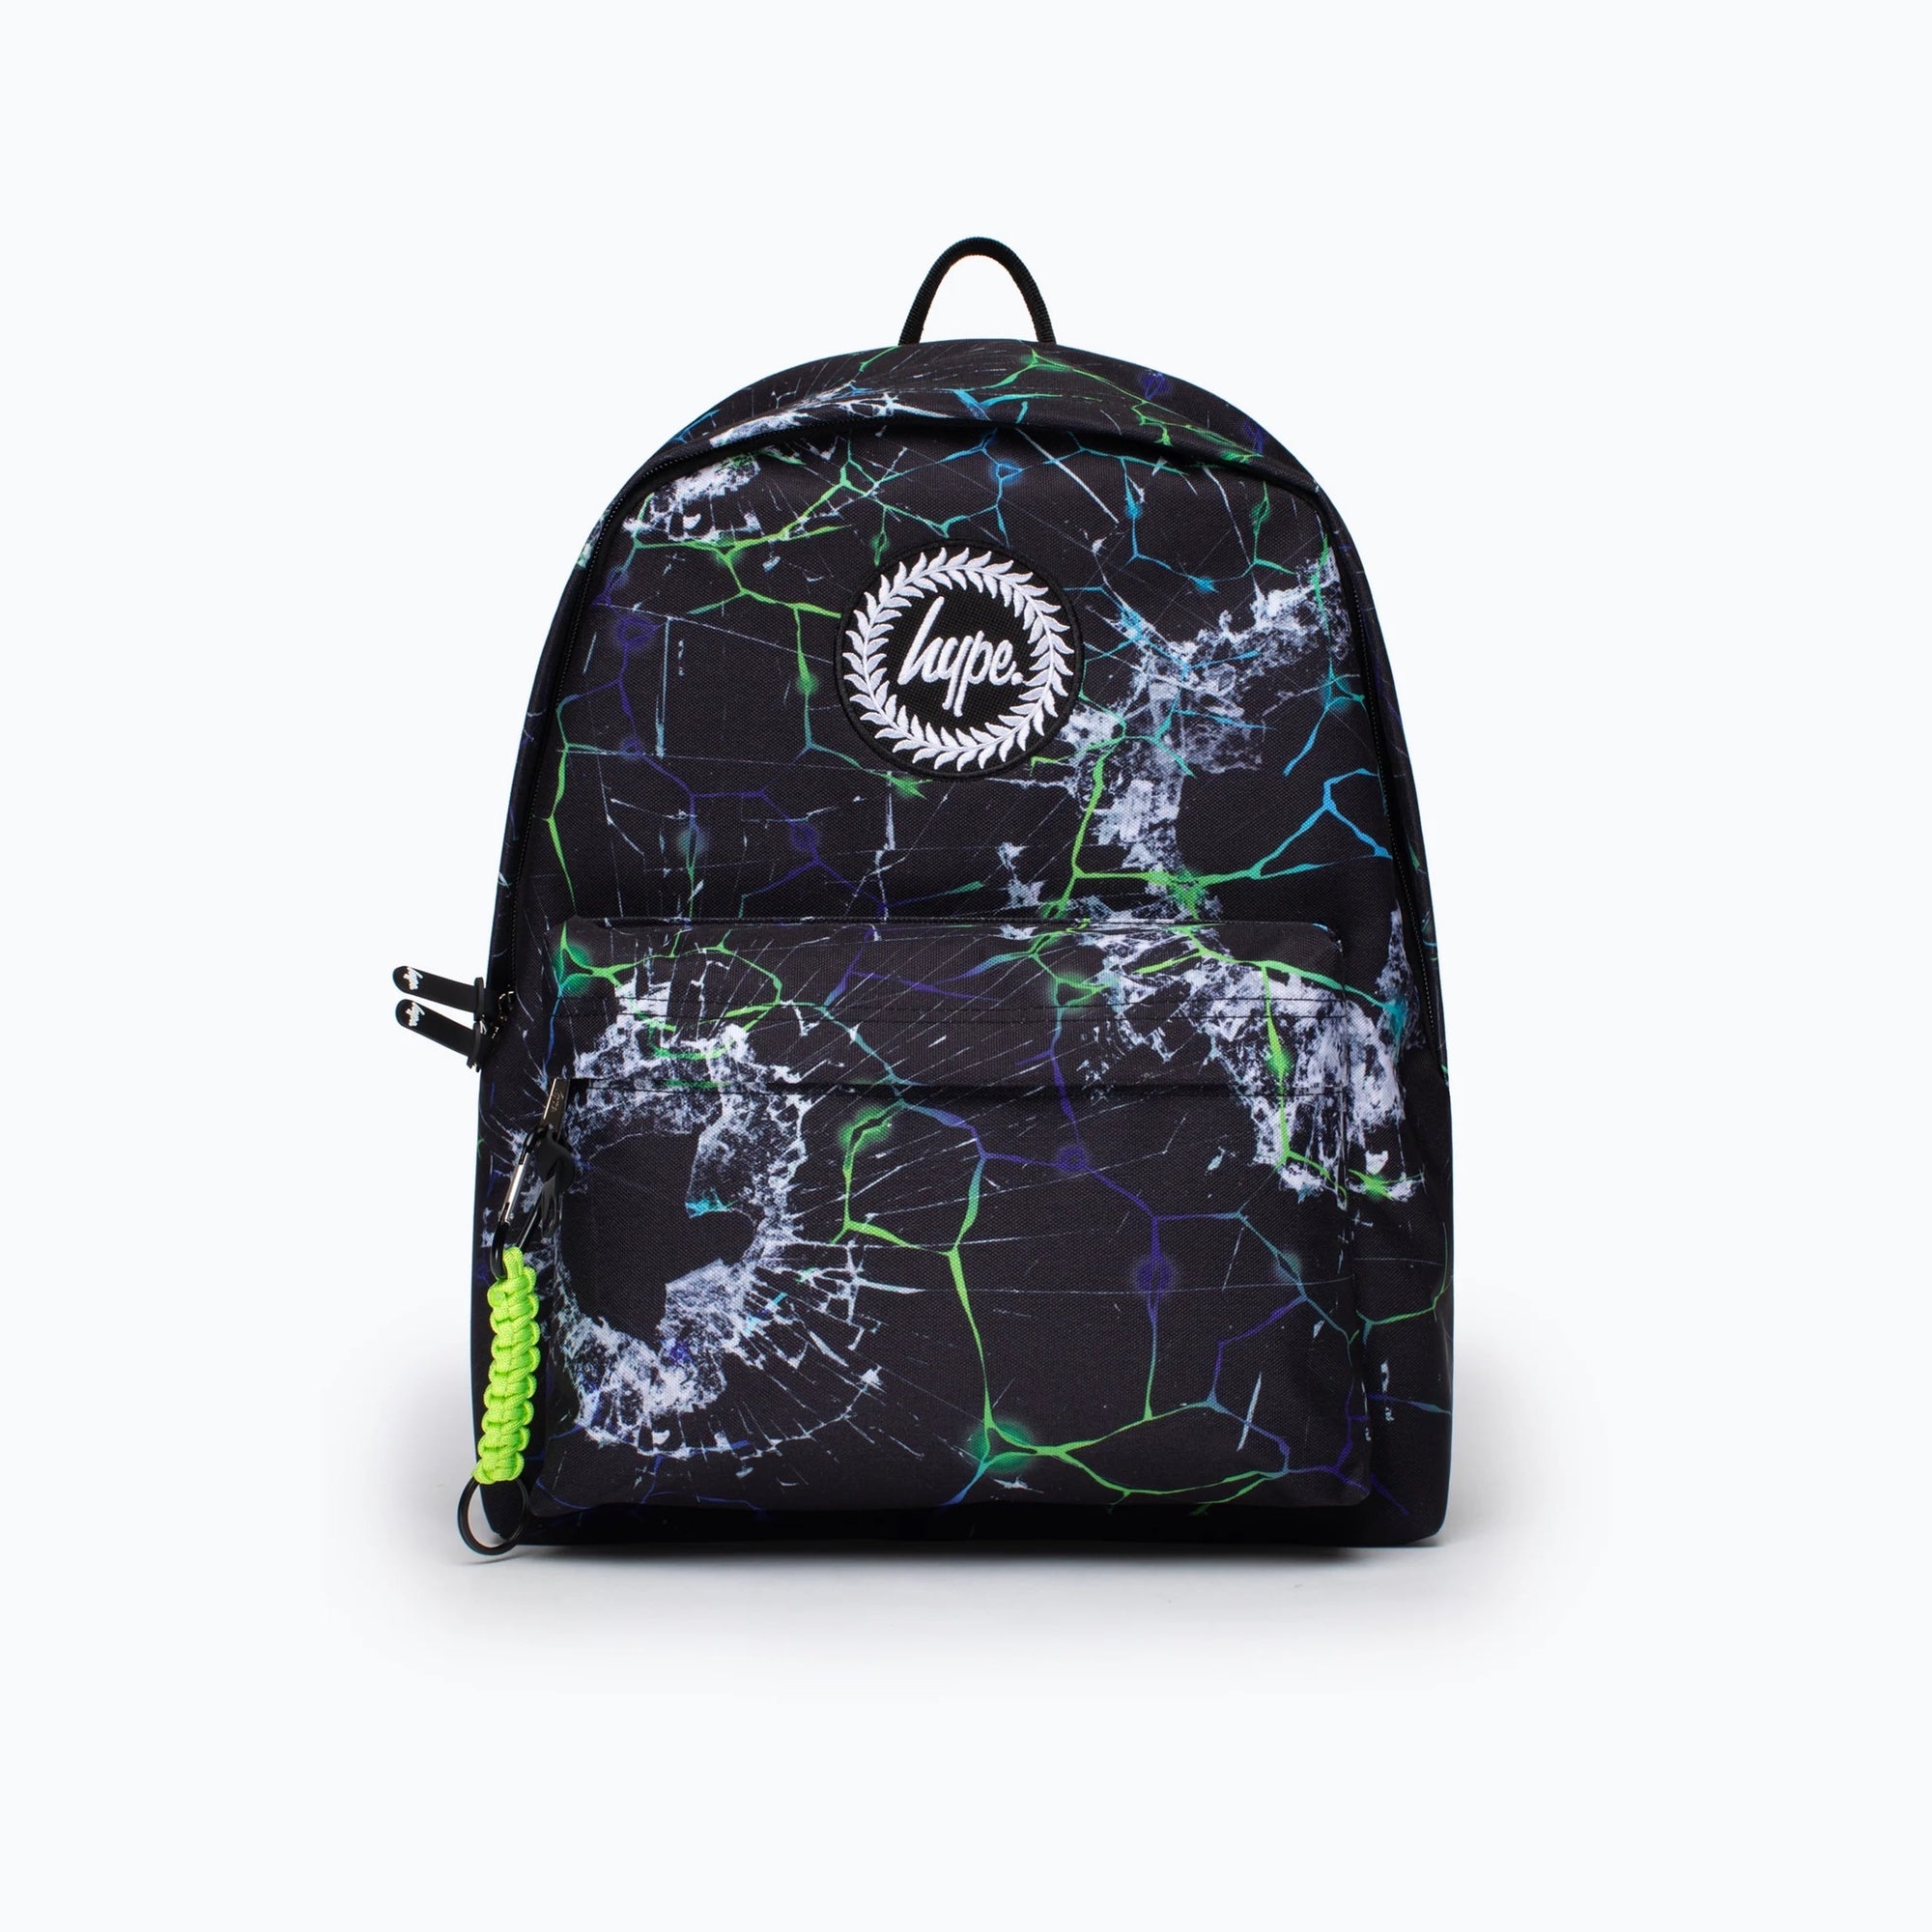 Hype Multi Smash Backpack Yucb095 Accessories ONE SIZE / Green